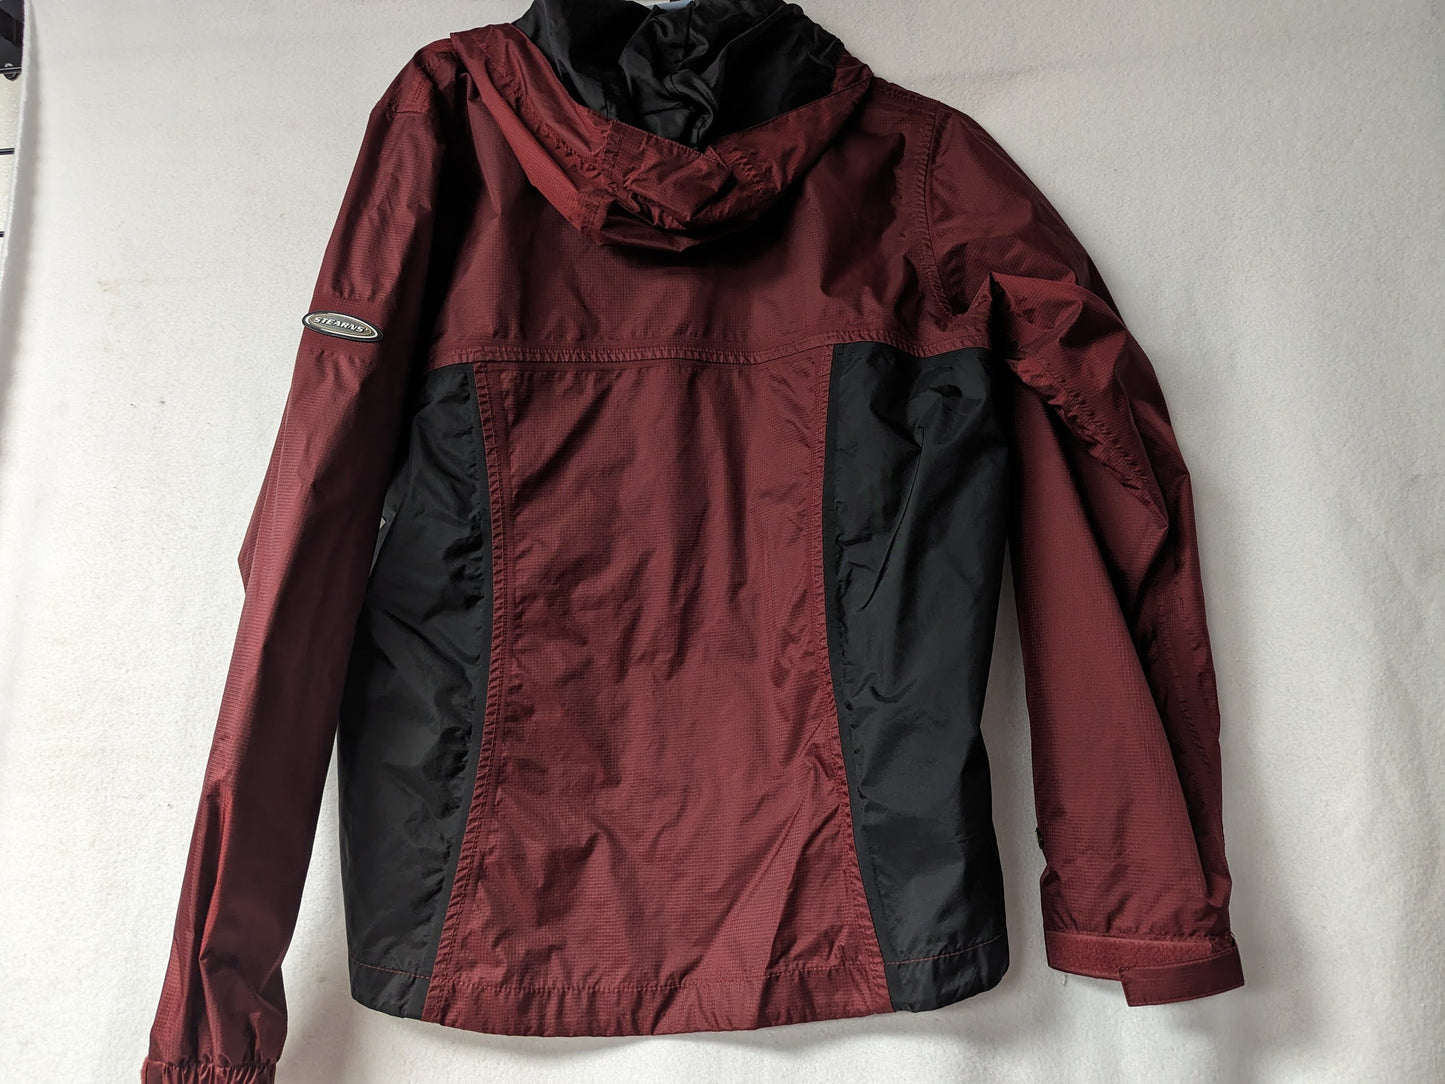 Stearns Shell Hooded Rain Jacket/Coat Size Large Color Maroon Condition Used